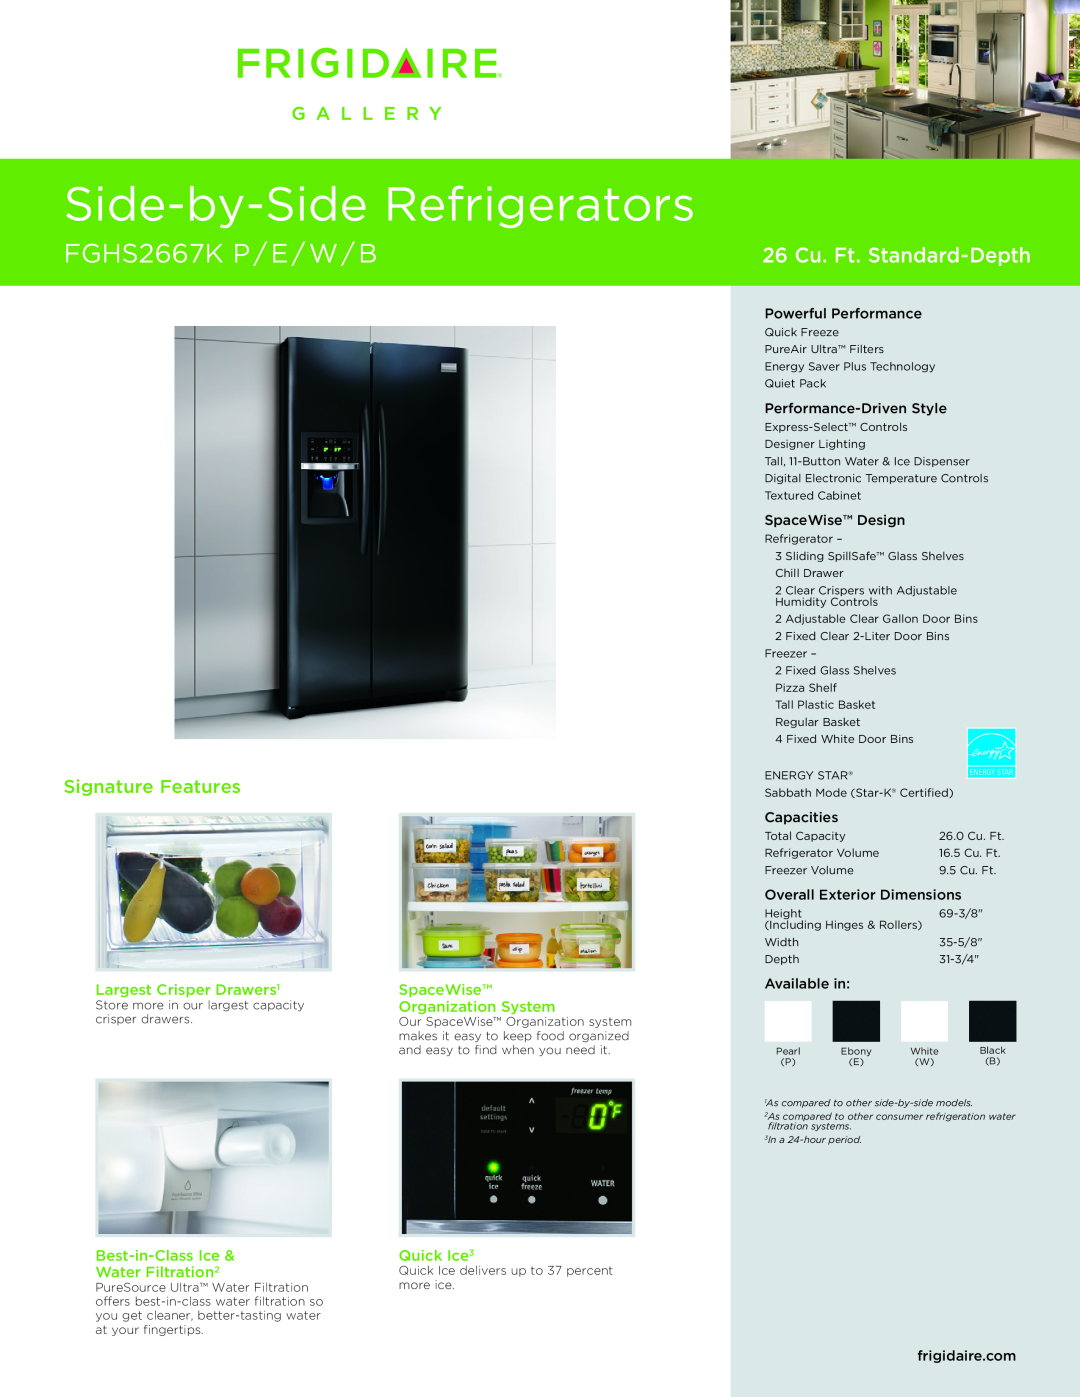 Frigidaire FGHS2667K dimensions Largest Crisper Drawers1, SpaceWise, Organization System, Best-in-ClassIce, Quick Ice3 